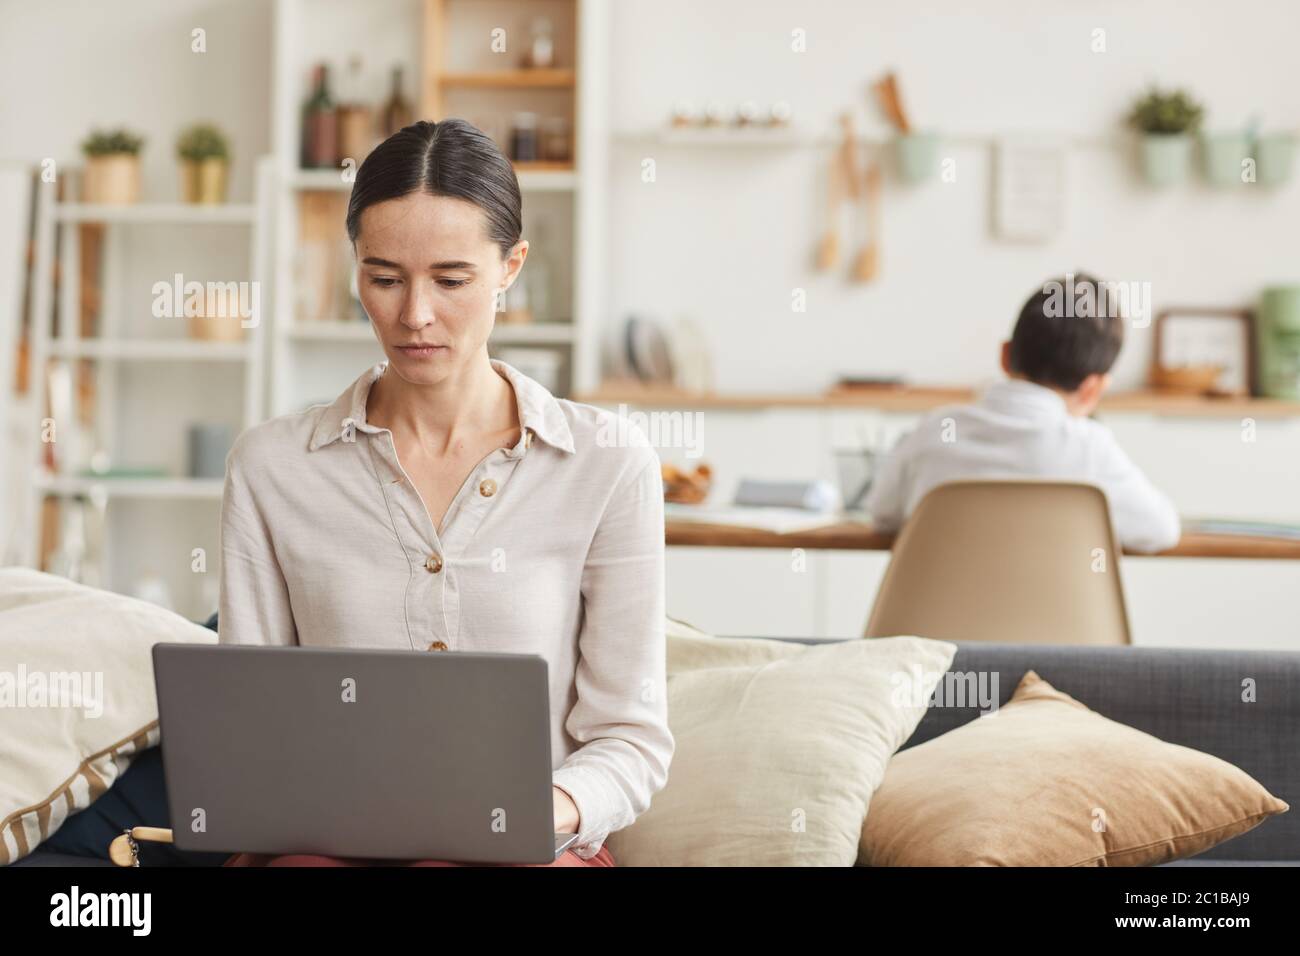 Warm-toned portrait of elegant young woman using laptop at home with her son studying in background, copy space Stock Photo